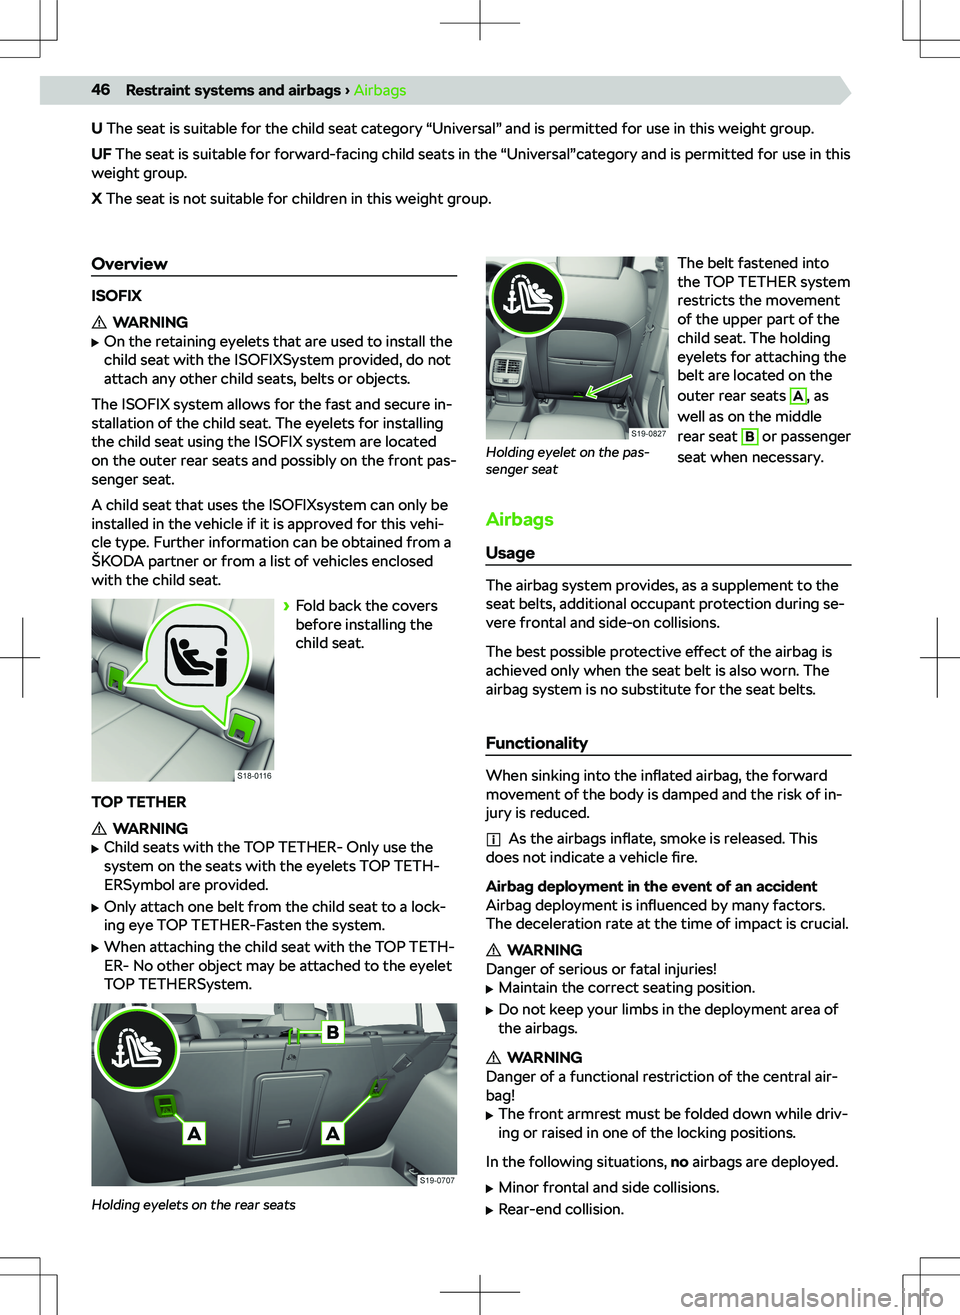 SKODA OCTAVIA 2022  Owner´s Manual U The seat is suitable for the child seat category “Universal” and is permitted for use in this weight group.
UF  The seat is suitable for forward-facing child seats in the “Universal”category